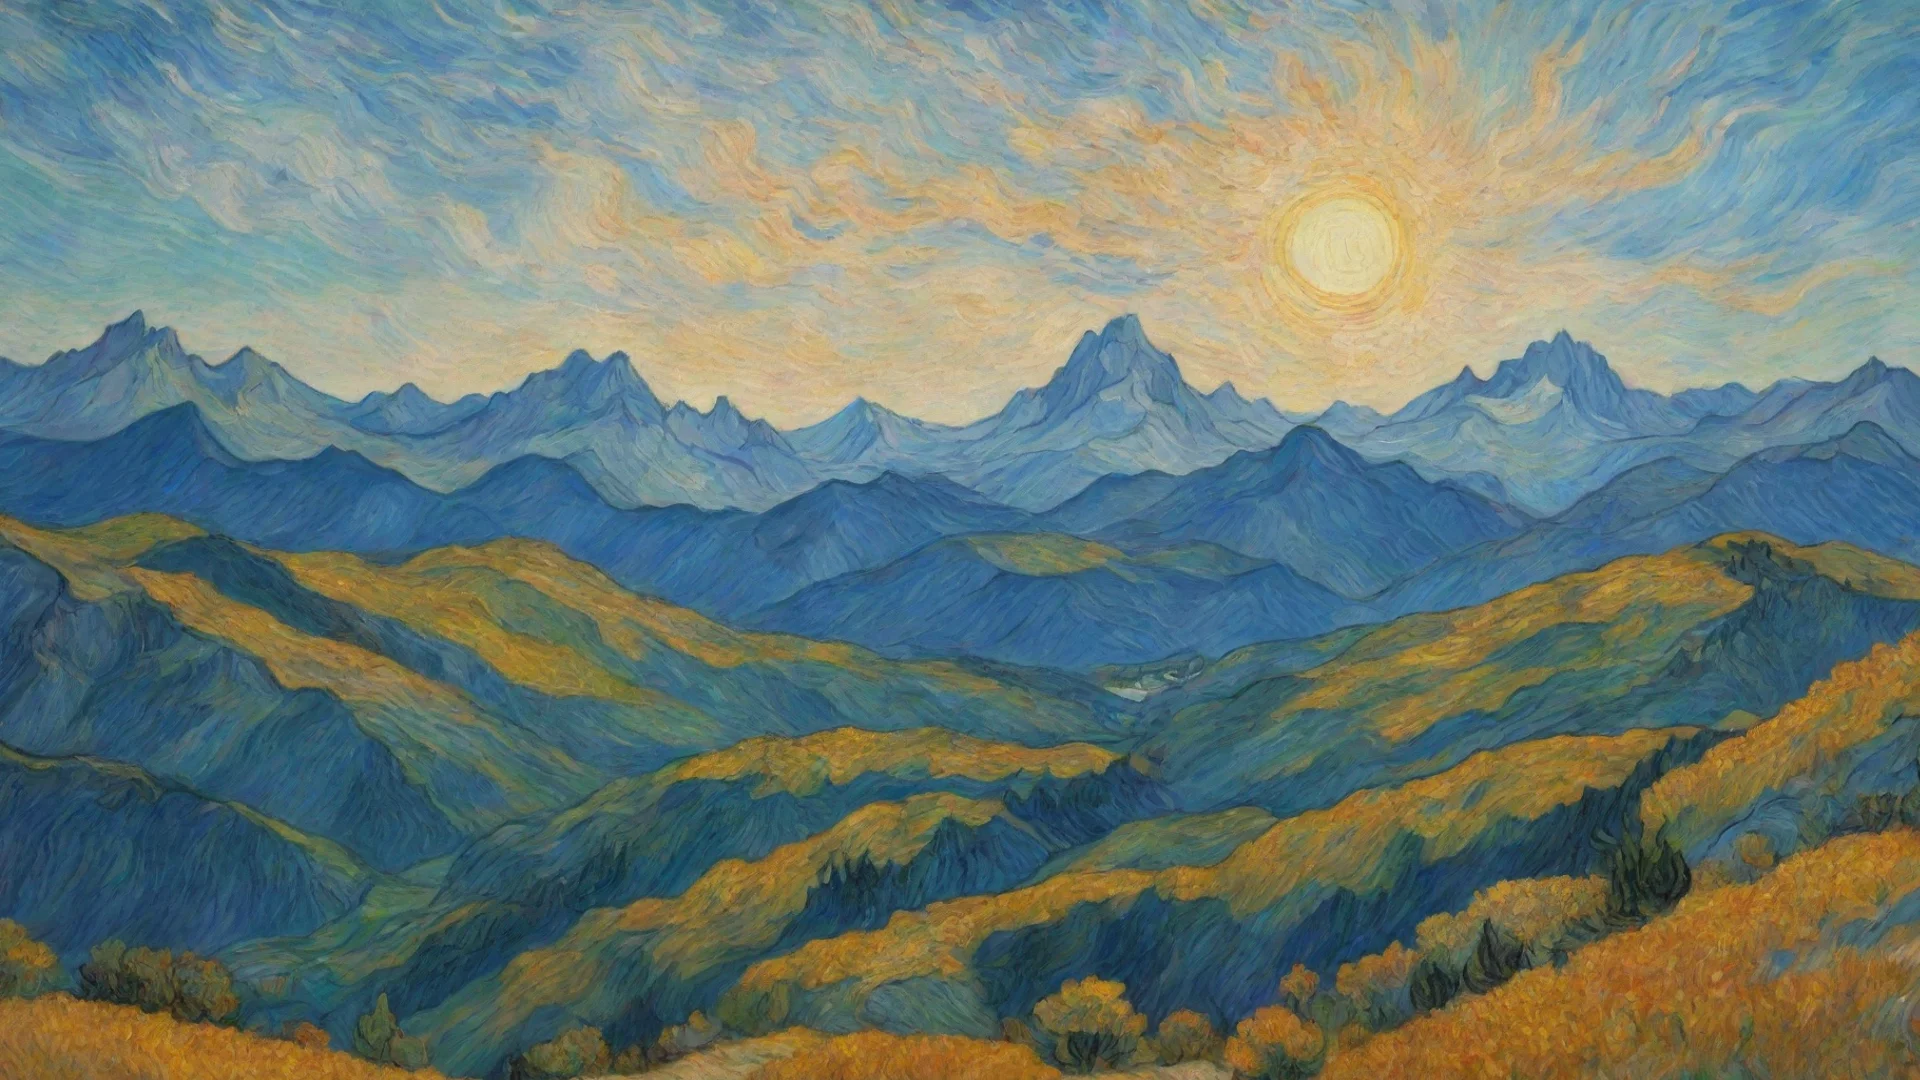 aiamazing amazing van gogh mountain top relaxing calm hd aesthetic peace awesome portrait 2 wide